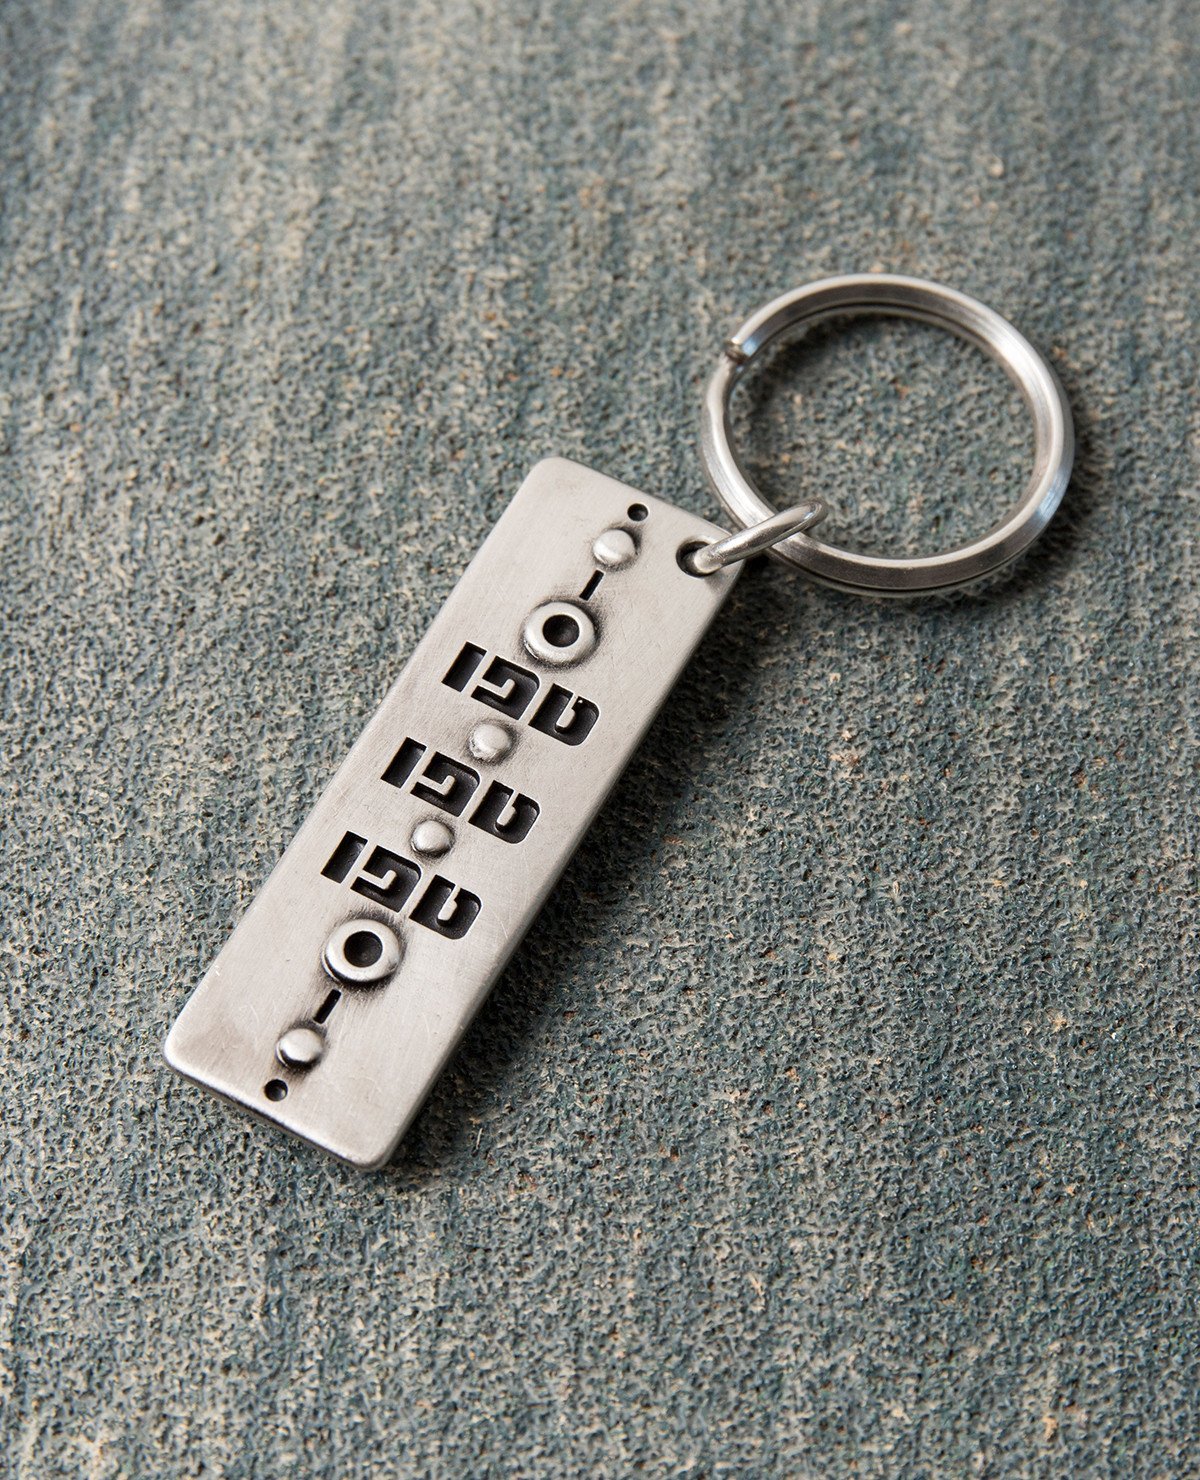 A gorgeous keychain that is always good to have in your pocket or your bag. Designed in the shape of a rectangle, one side has the words "Tfu Tfu Tfu" ("Touch Wood") written on it. Embedded on the other side is a beautiful blue eye, to ward off the "evil eye". Both sides display a similar artistic decoration. The keychain is coated in sterling silver and is strong and reliable. The most protecting gift you can give! Grant it with love to anyone important to you who you wish to protect from any harm that may